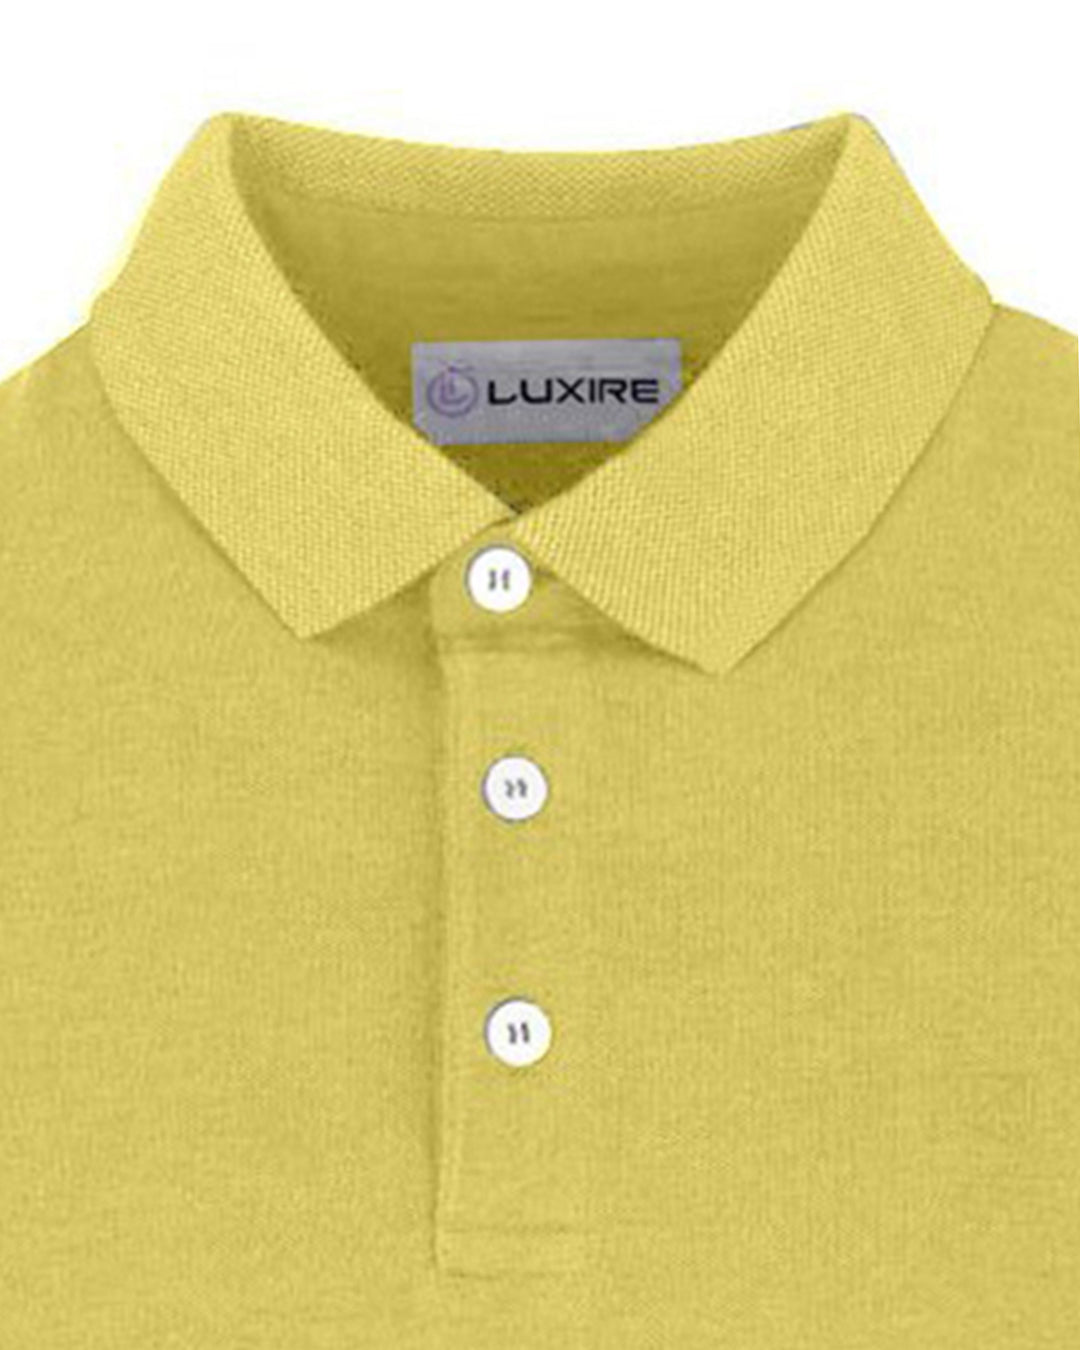 Collar of the custom oxford polo shirt for men by Luxire in mid yellow